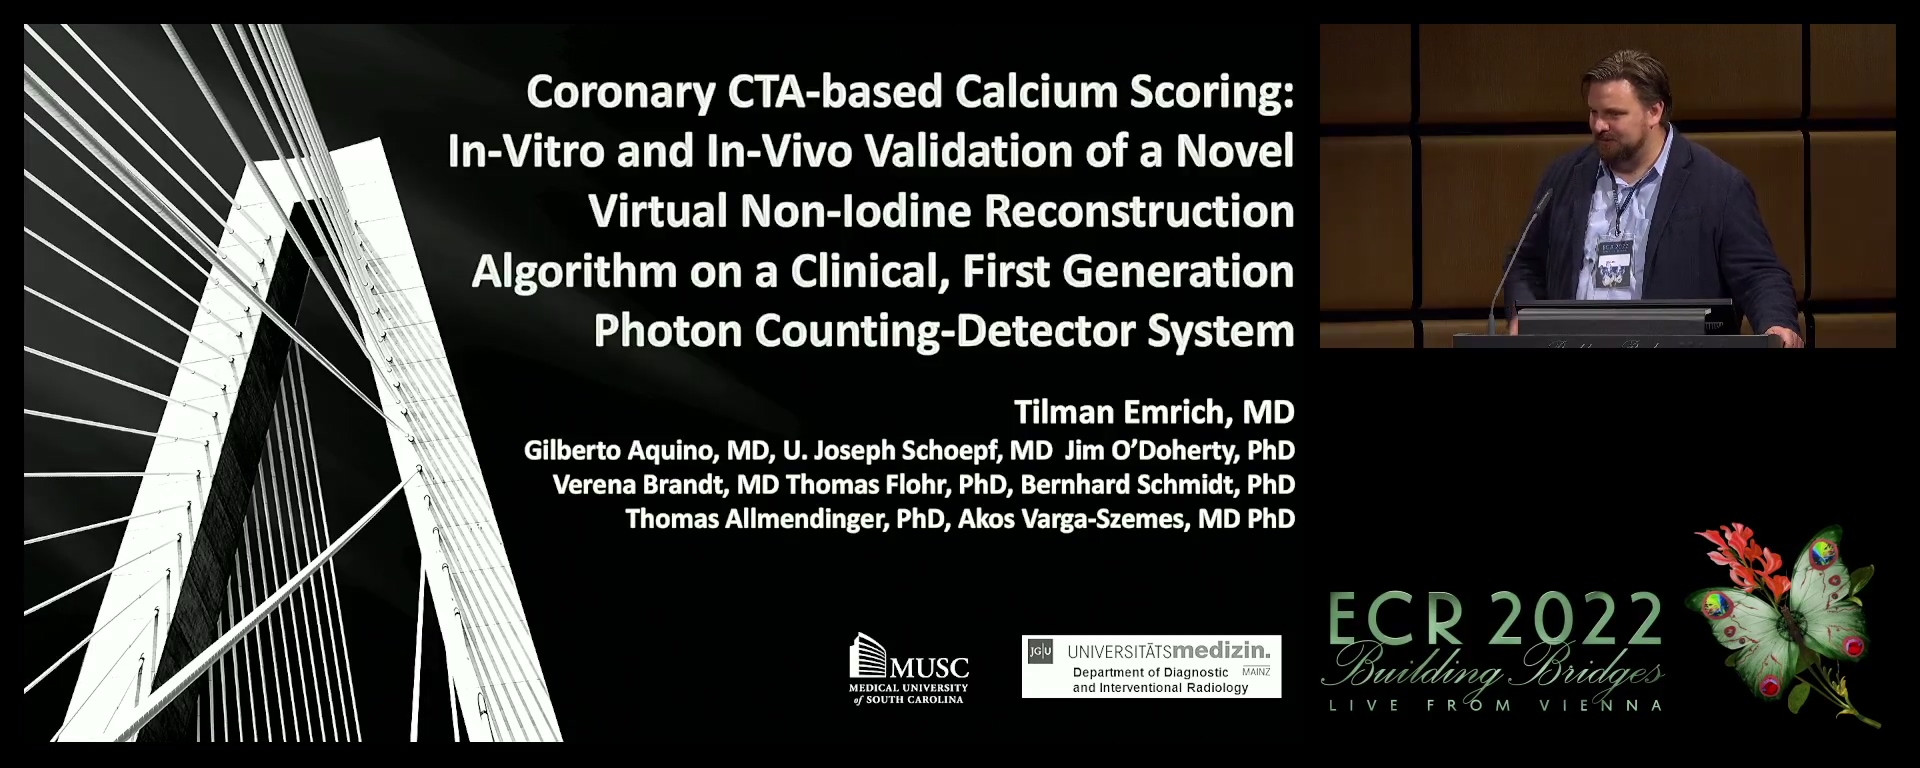 Coronary CTA-based calcium scoring: in-vitro and in-vivo validation of a novel virtual non-iodine reconstruction algorithm on a clinical, first-generation photon counting-detector system - Tilman Emrich, Charleston / US